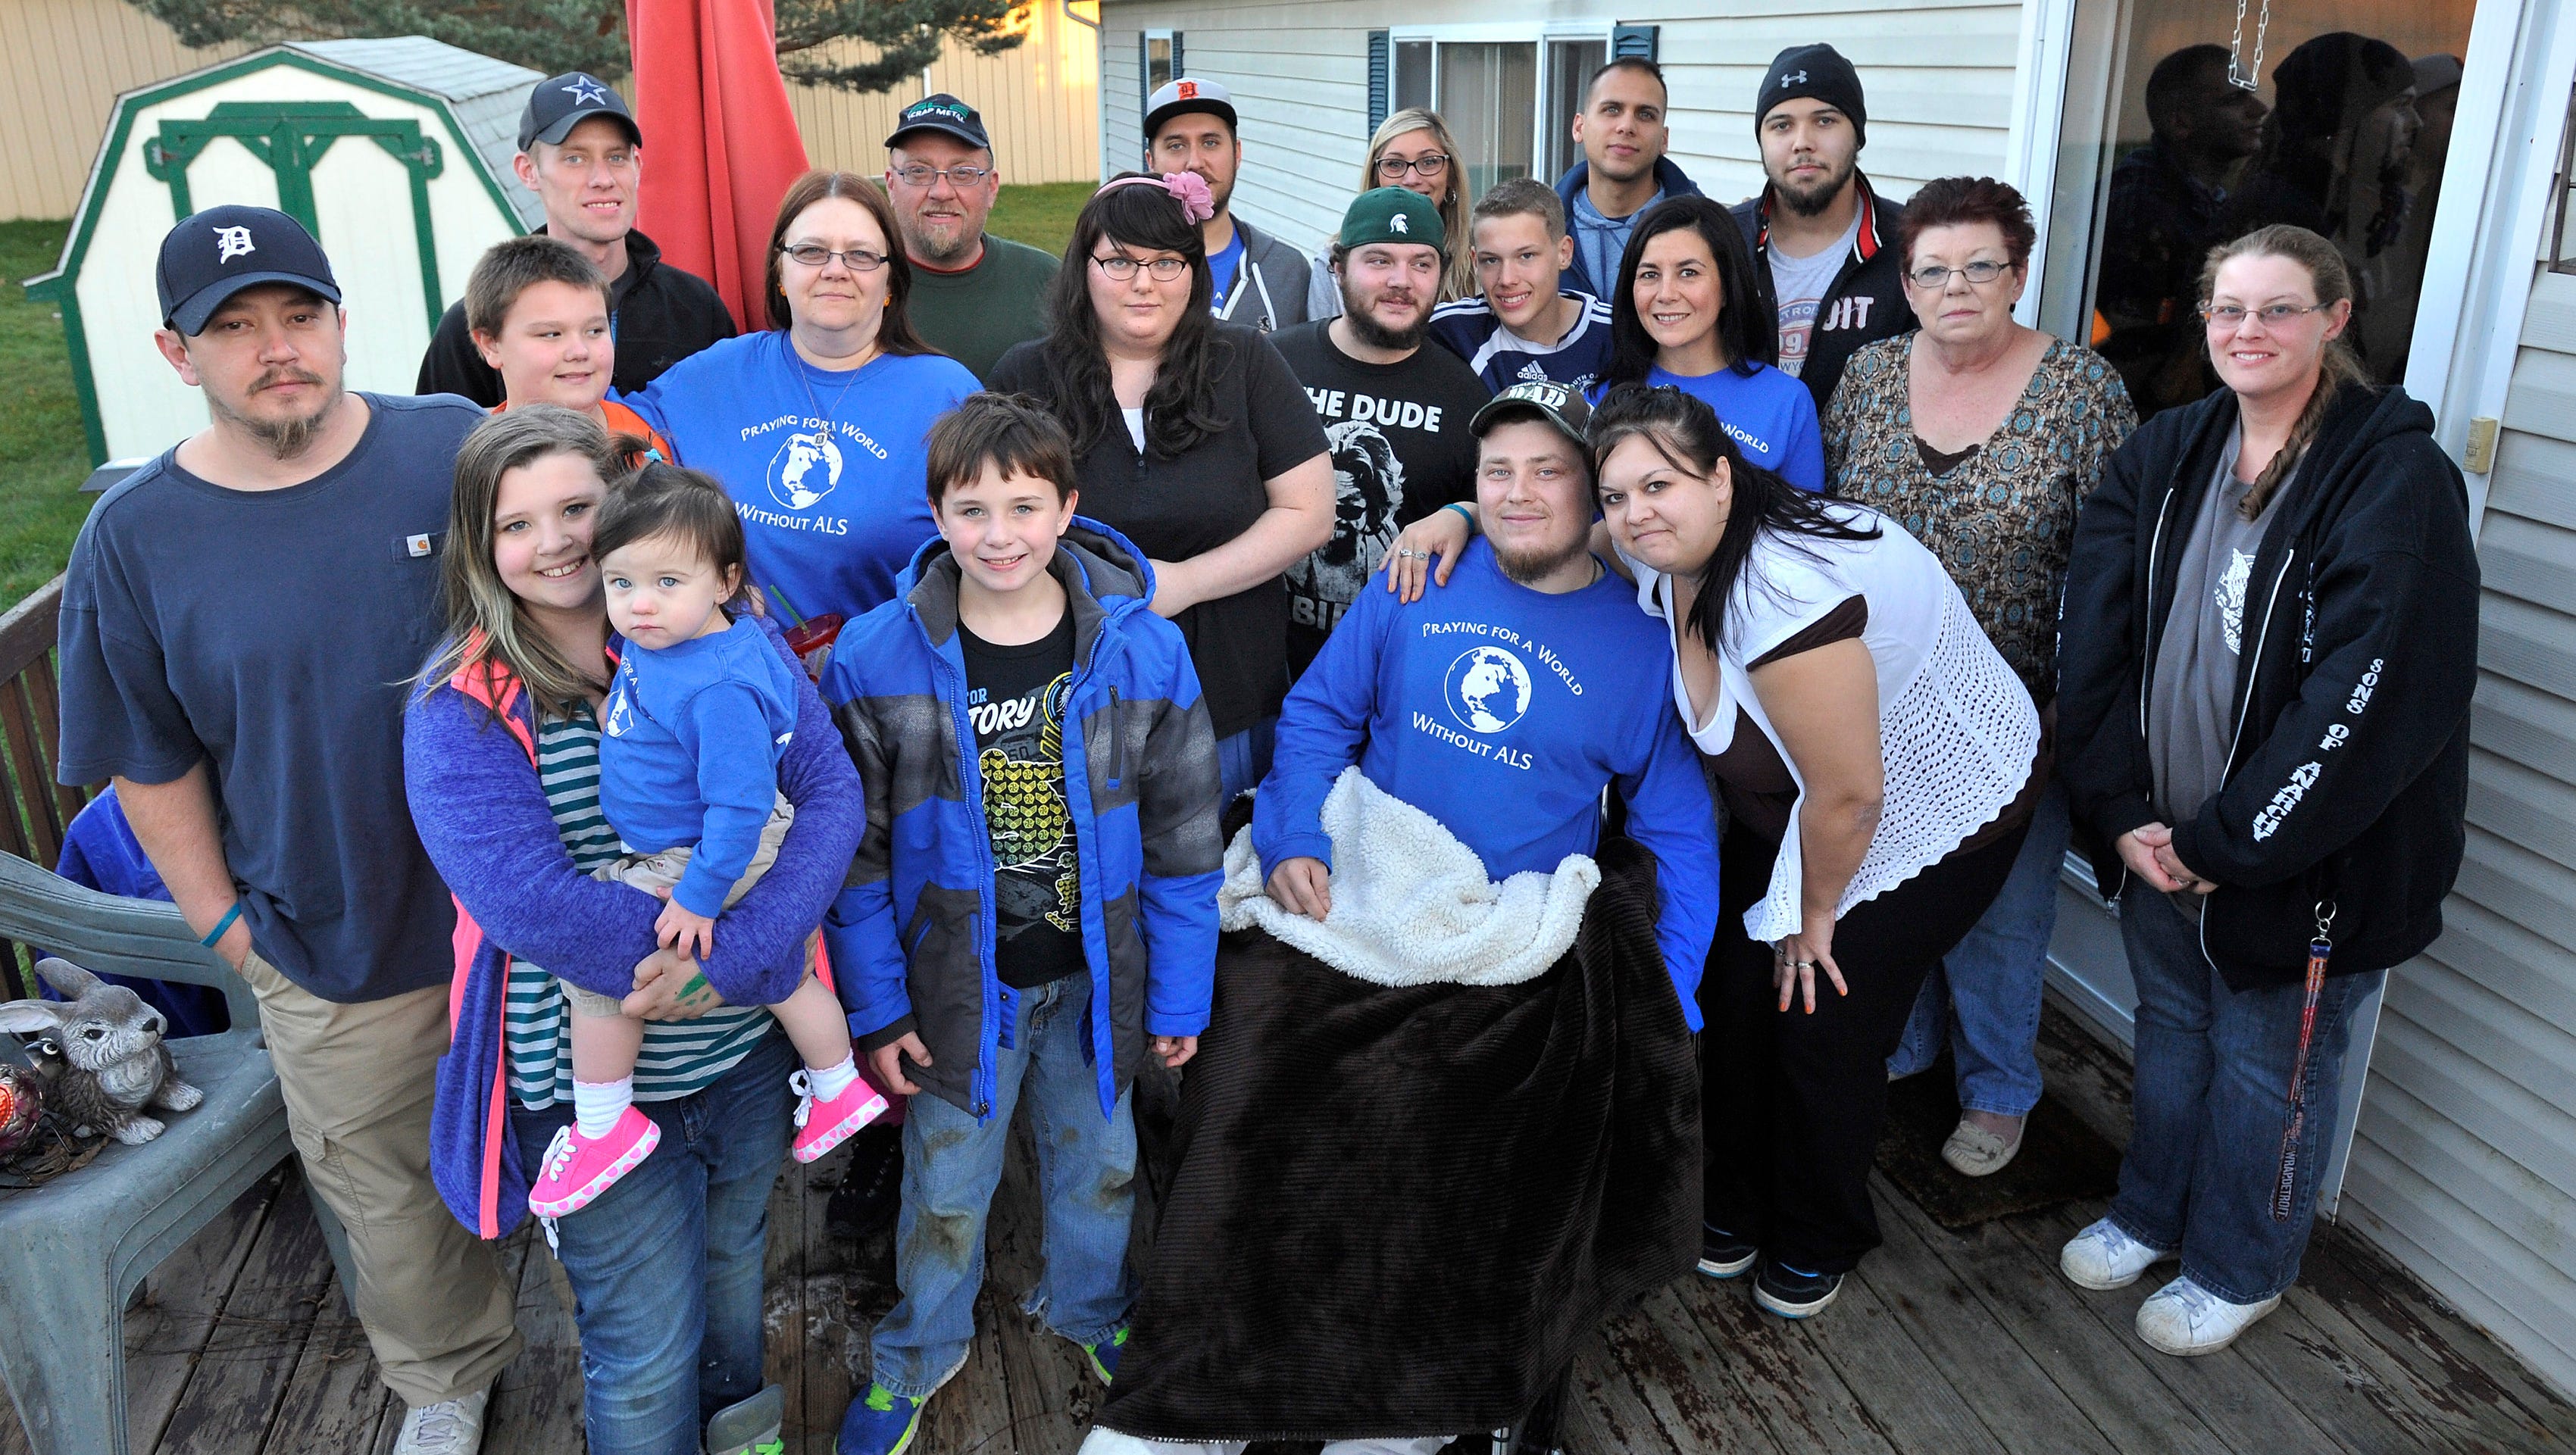 The Gutheries and extended family members gather on the porch after a Sunday family meal at Sallie Gutherie's home.